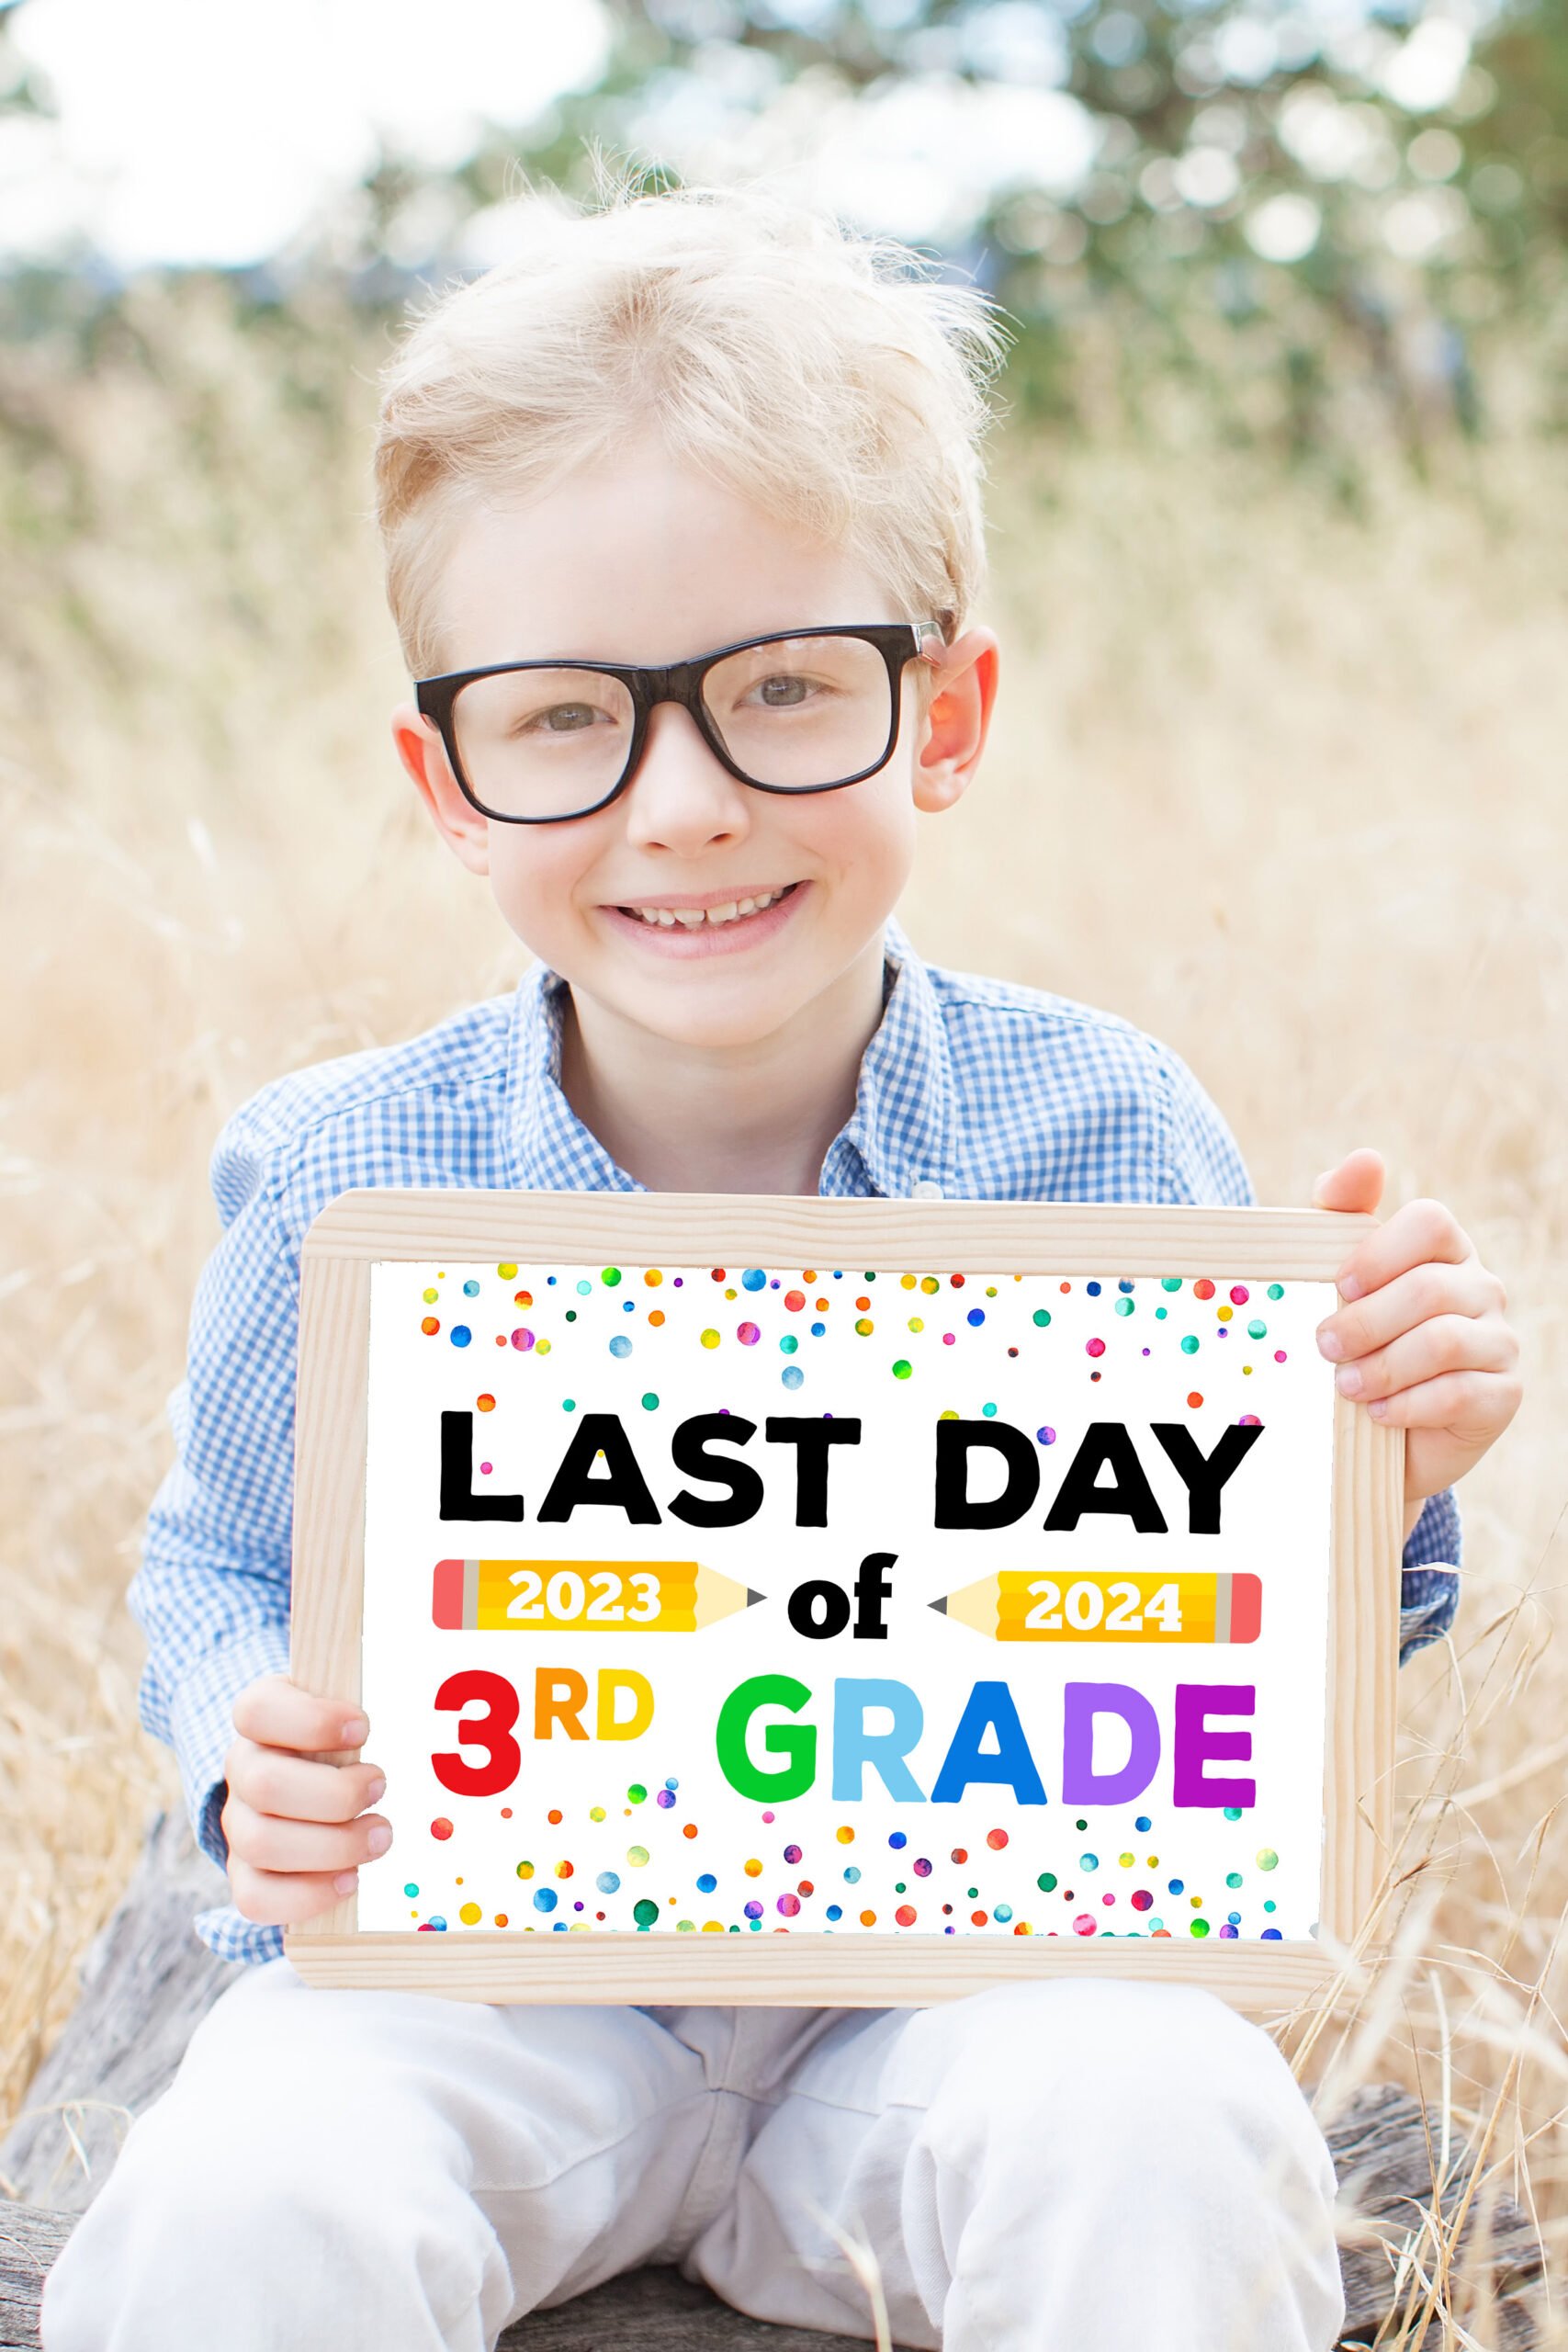 smiling schoolboy in glasses holding "Last Day of School 2024" sign